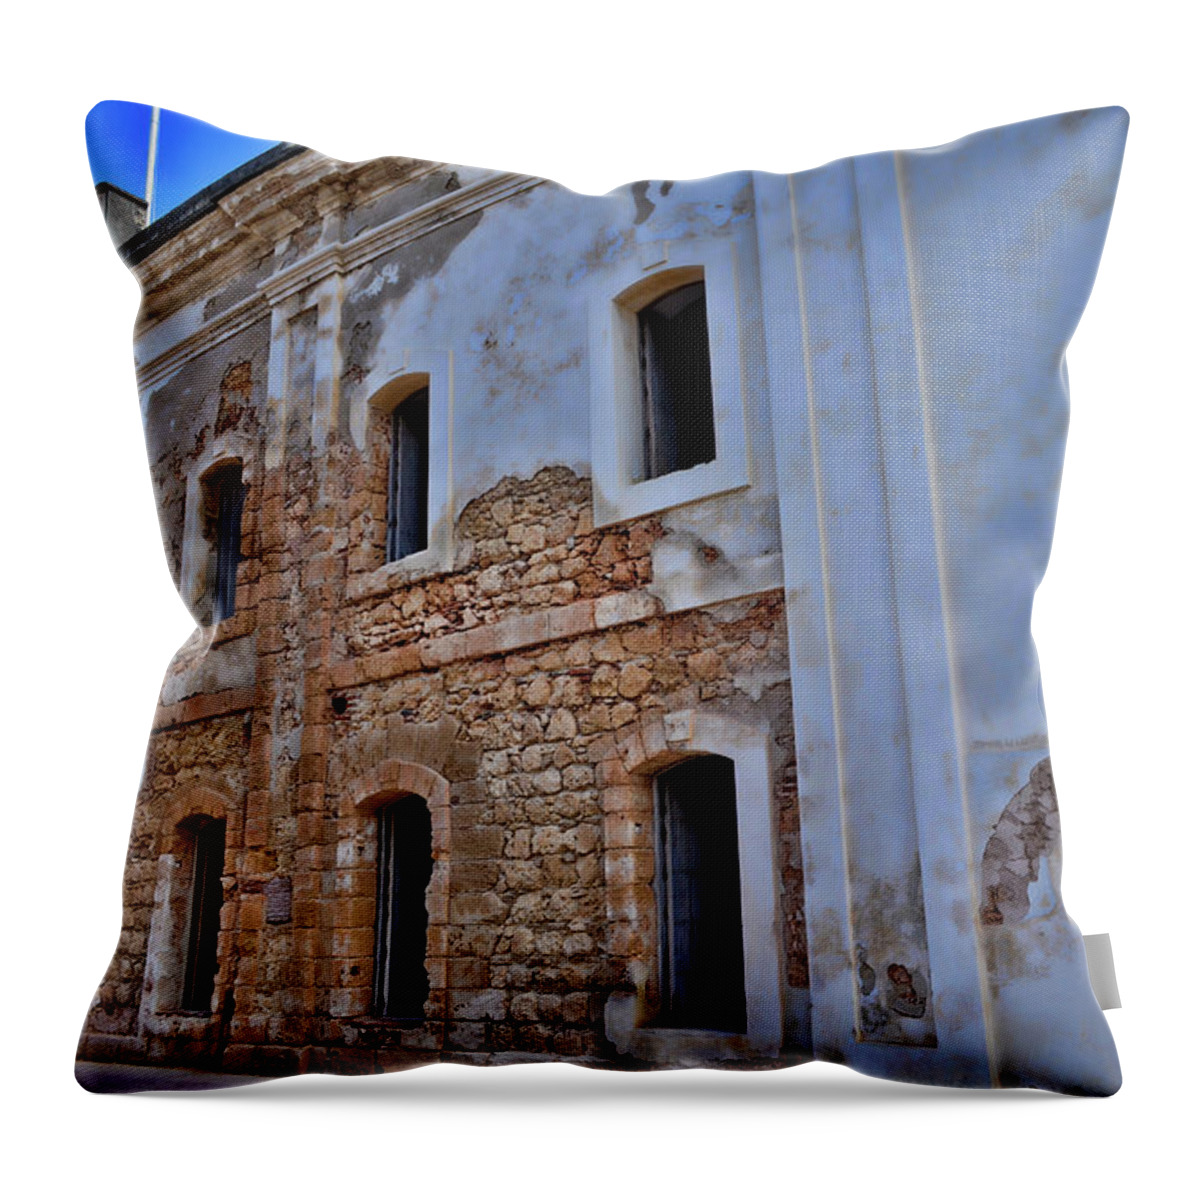 Puerto Rico Throw Pillow featuring the photograph Spanish Fort by Segura Shaw Photography